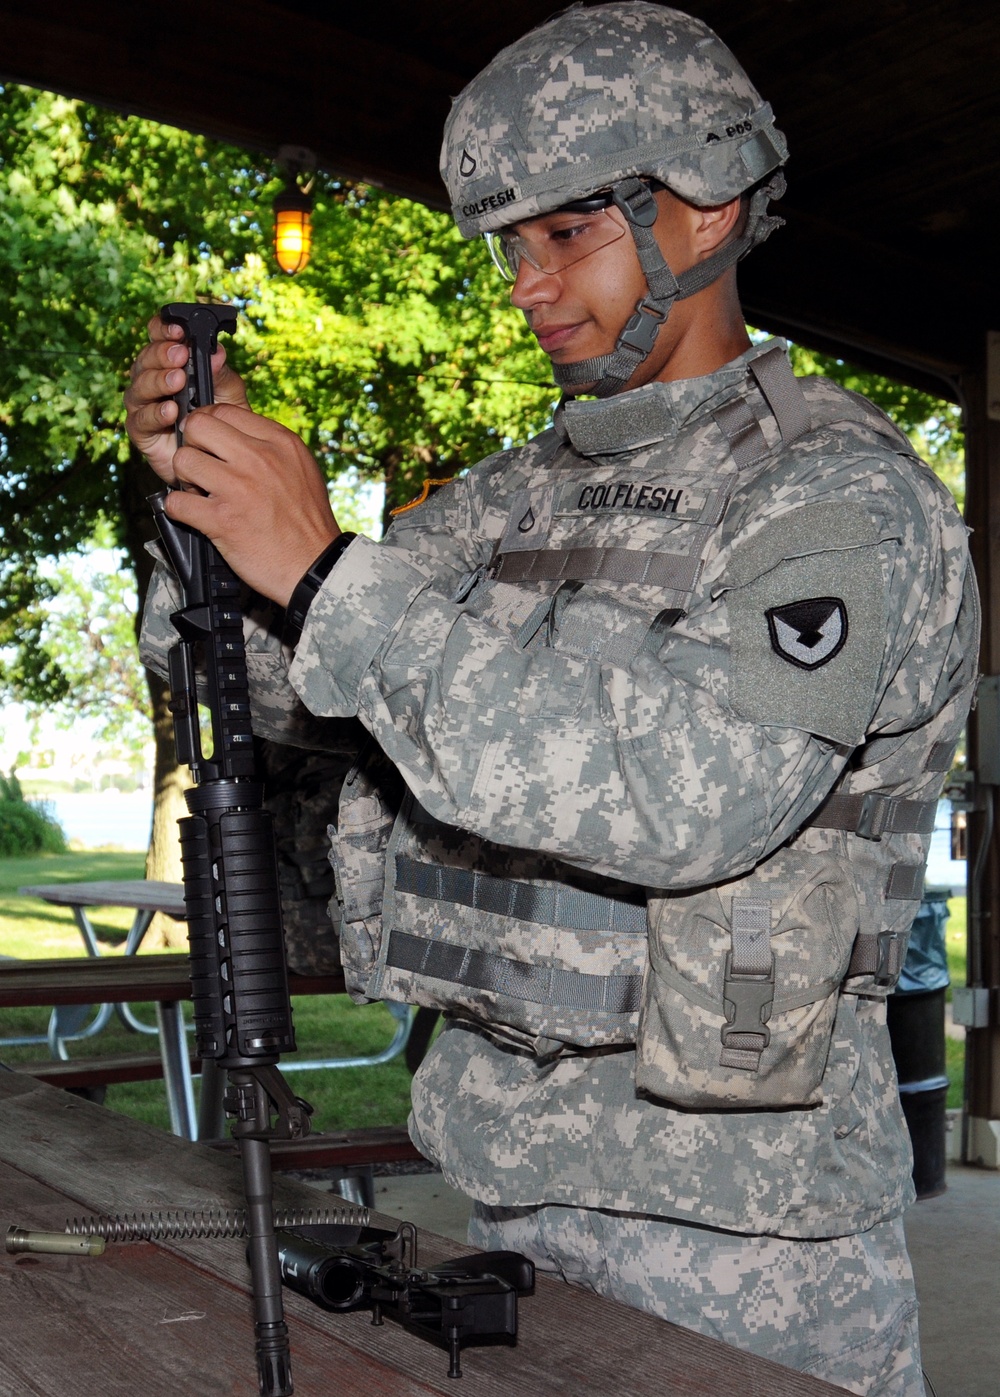 2014 AMC Best Warrior Competition - Weapons assembly